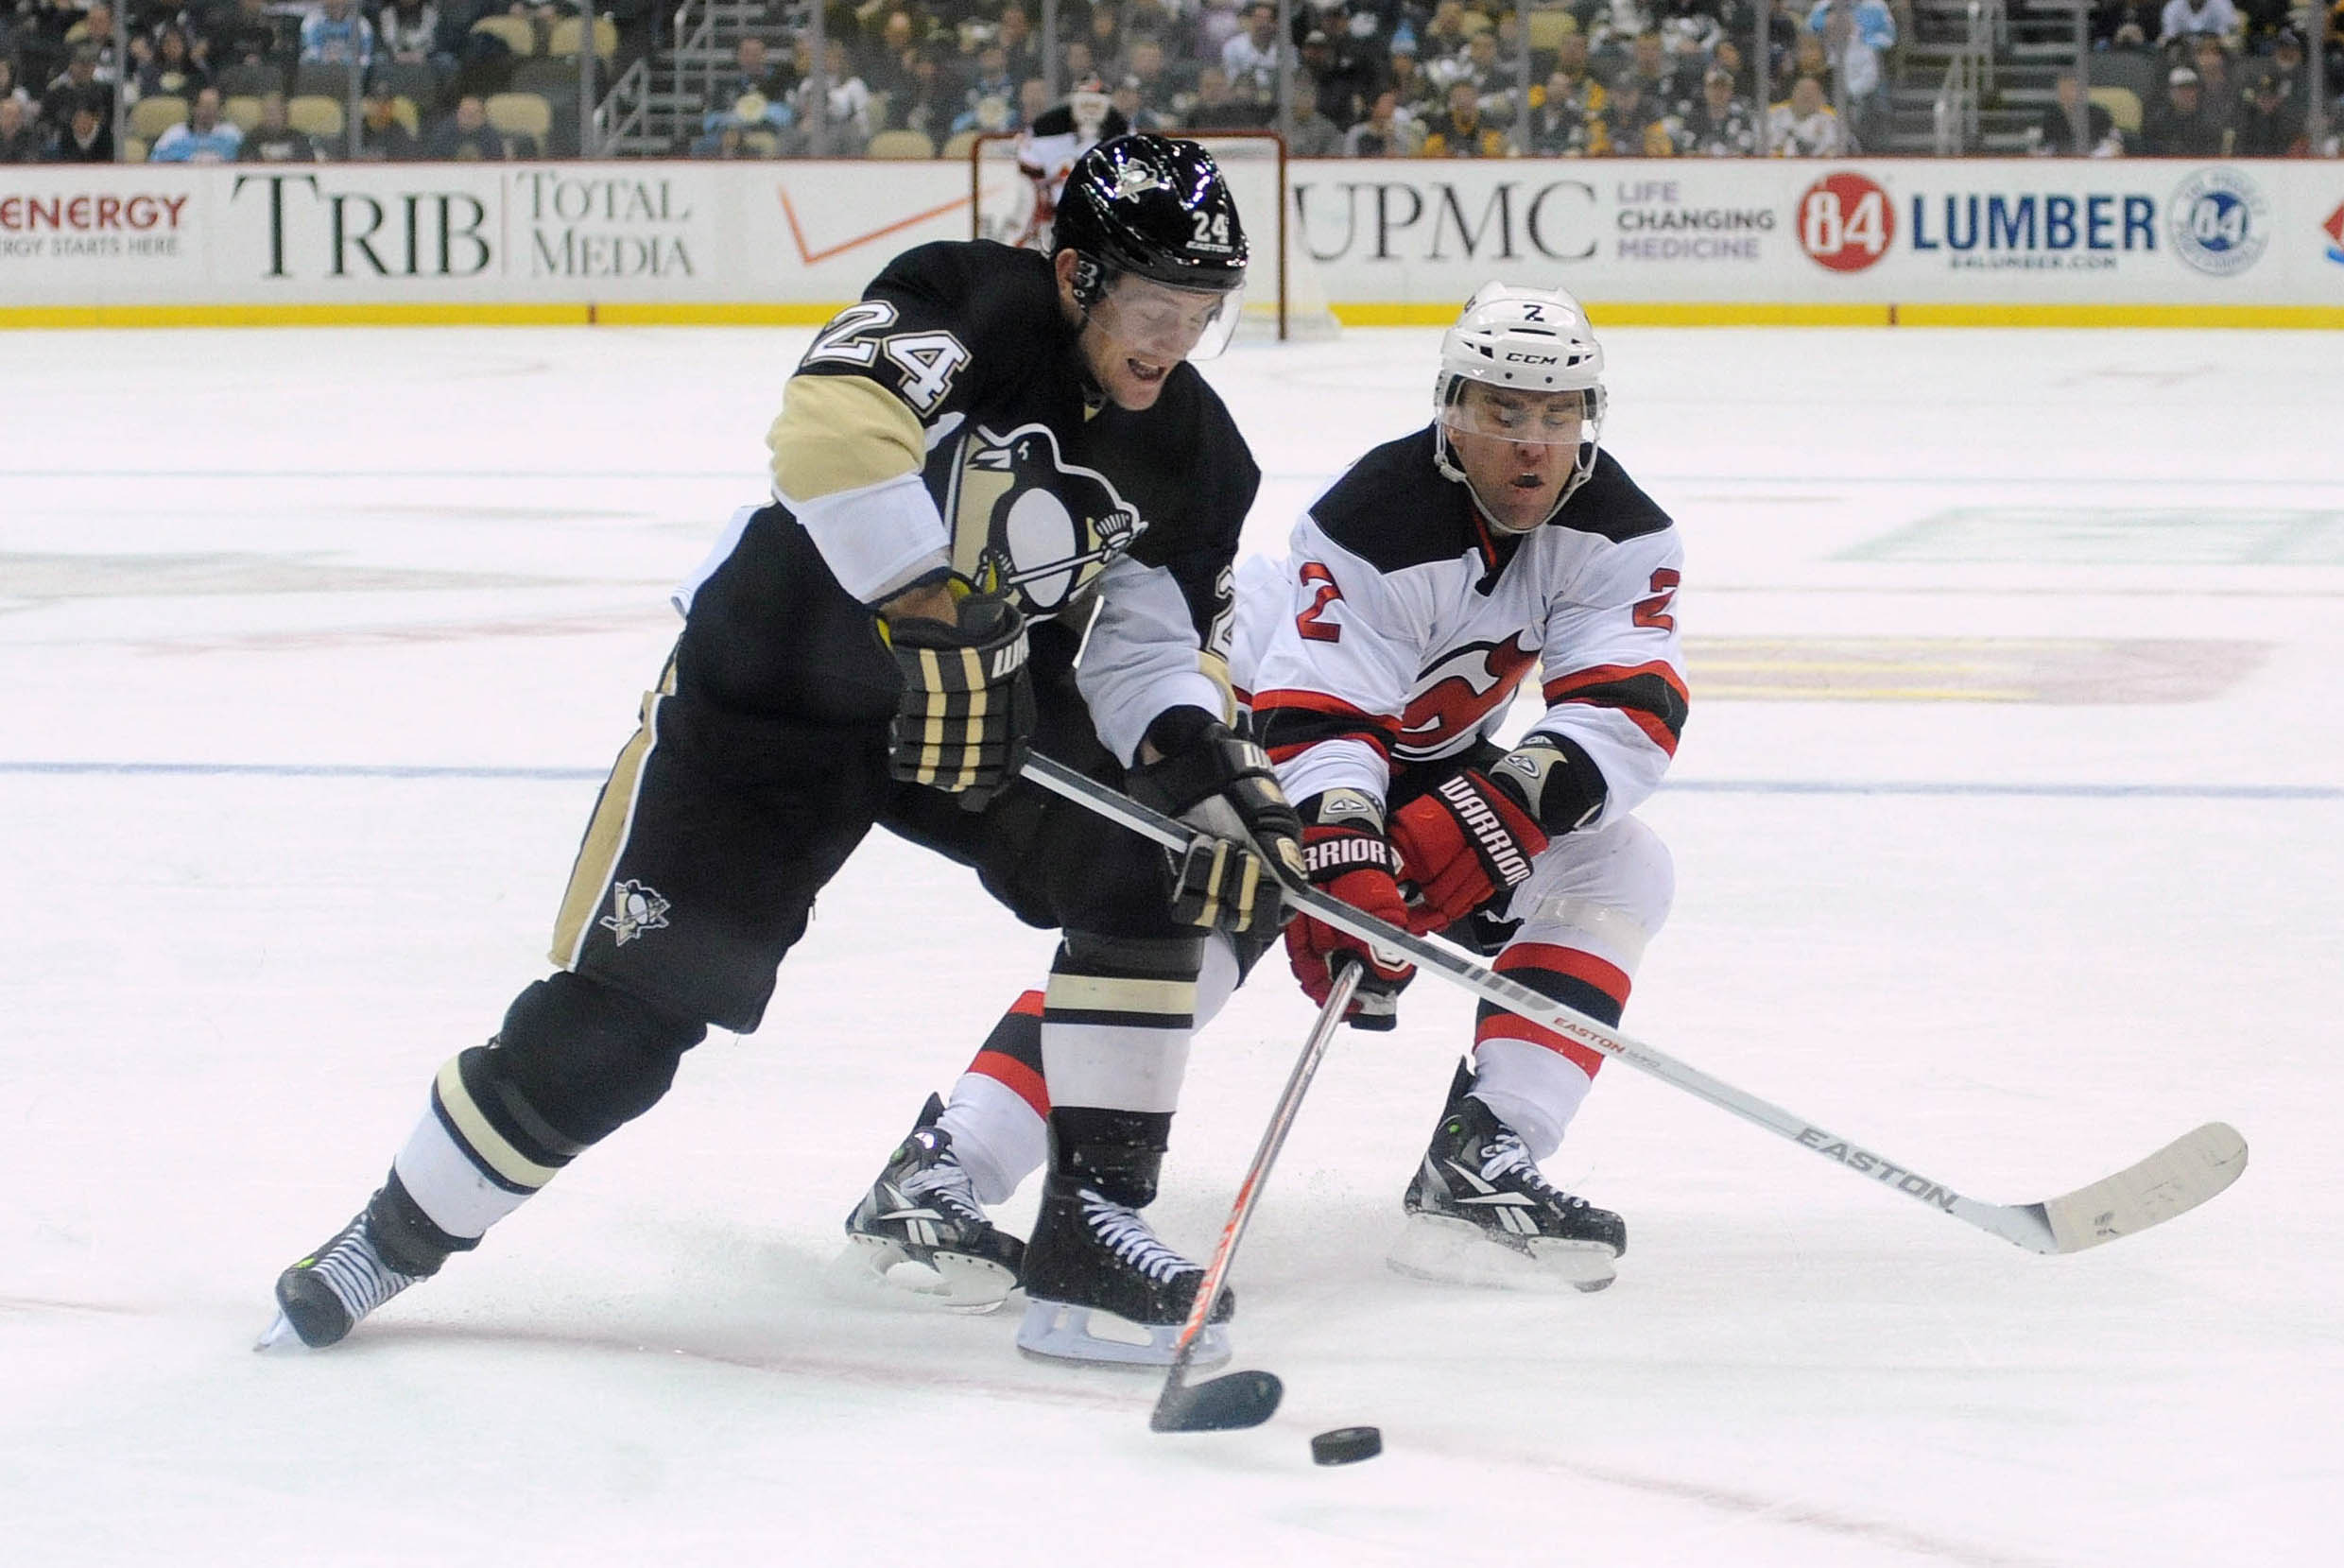 New Jersey Devils vs. Pittsburgh Penguins: Live Stream, TV Channel, Start  Time  4/4/2023 - How to Watch and Stream Major League & College Sports -  Sports Illustrated.